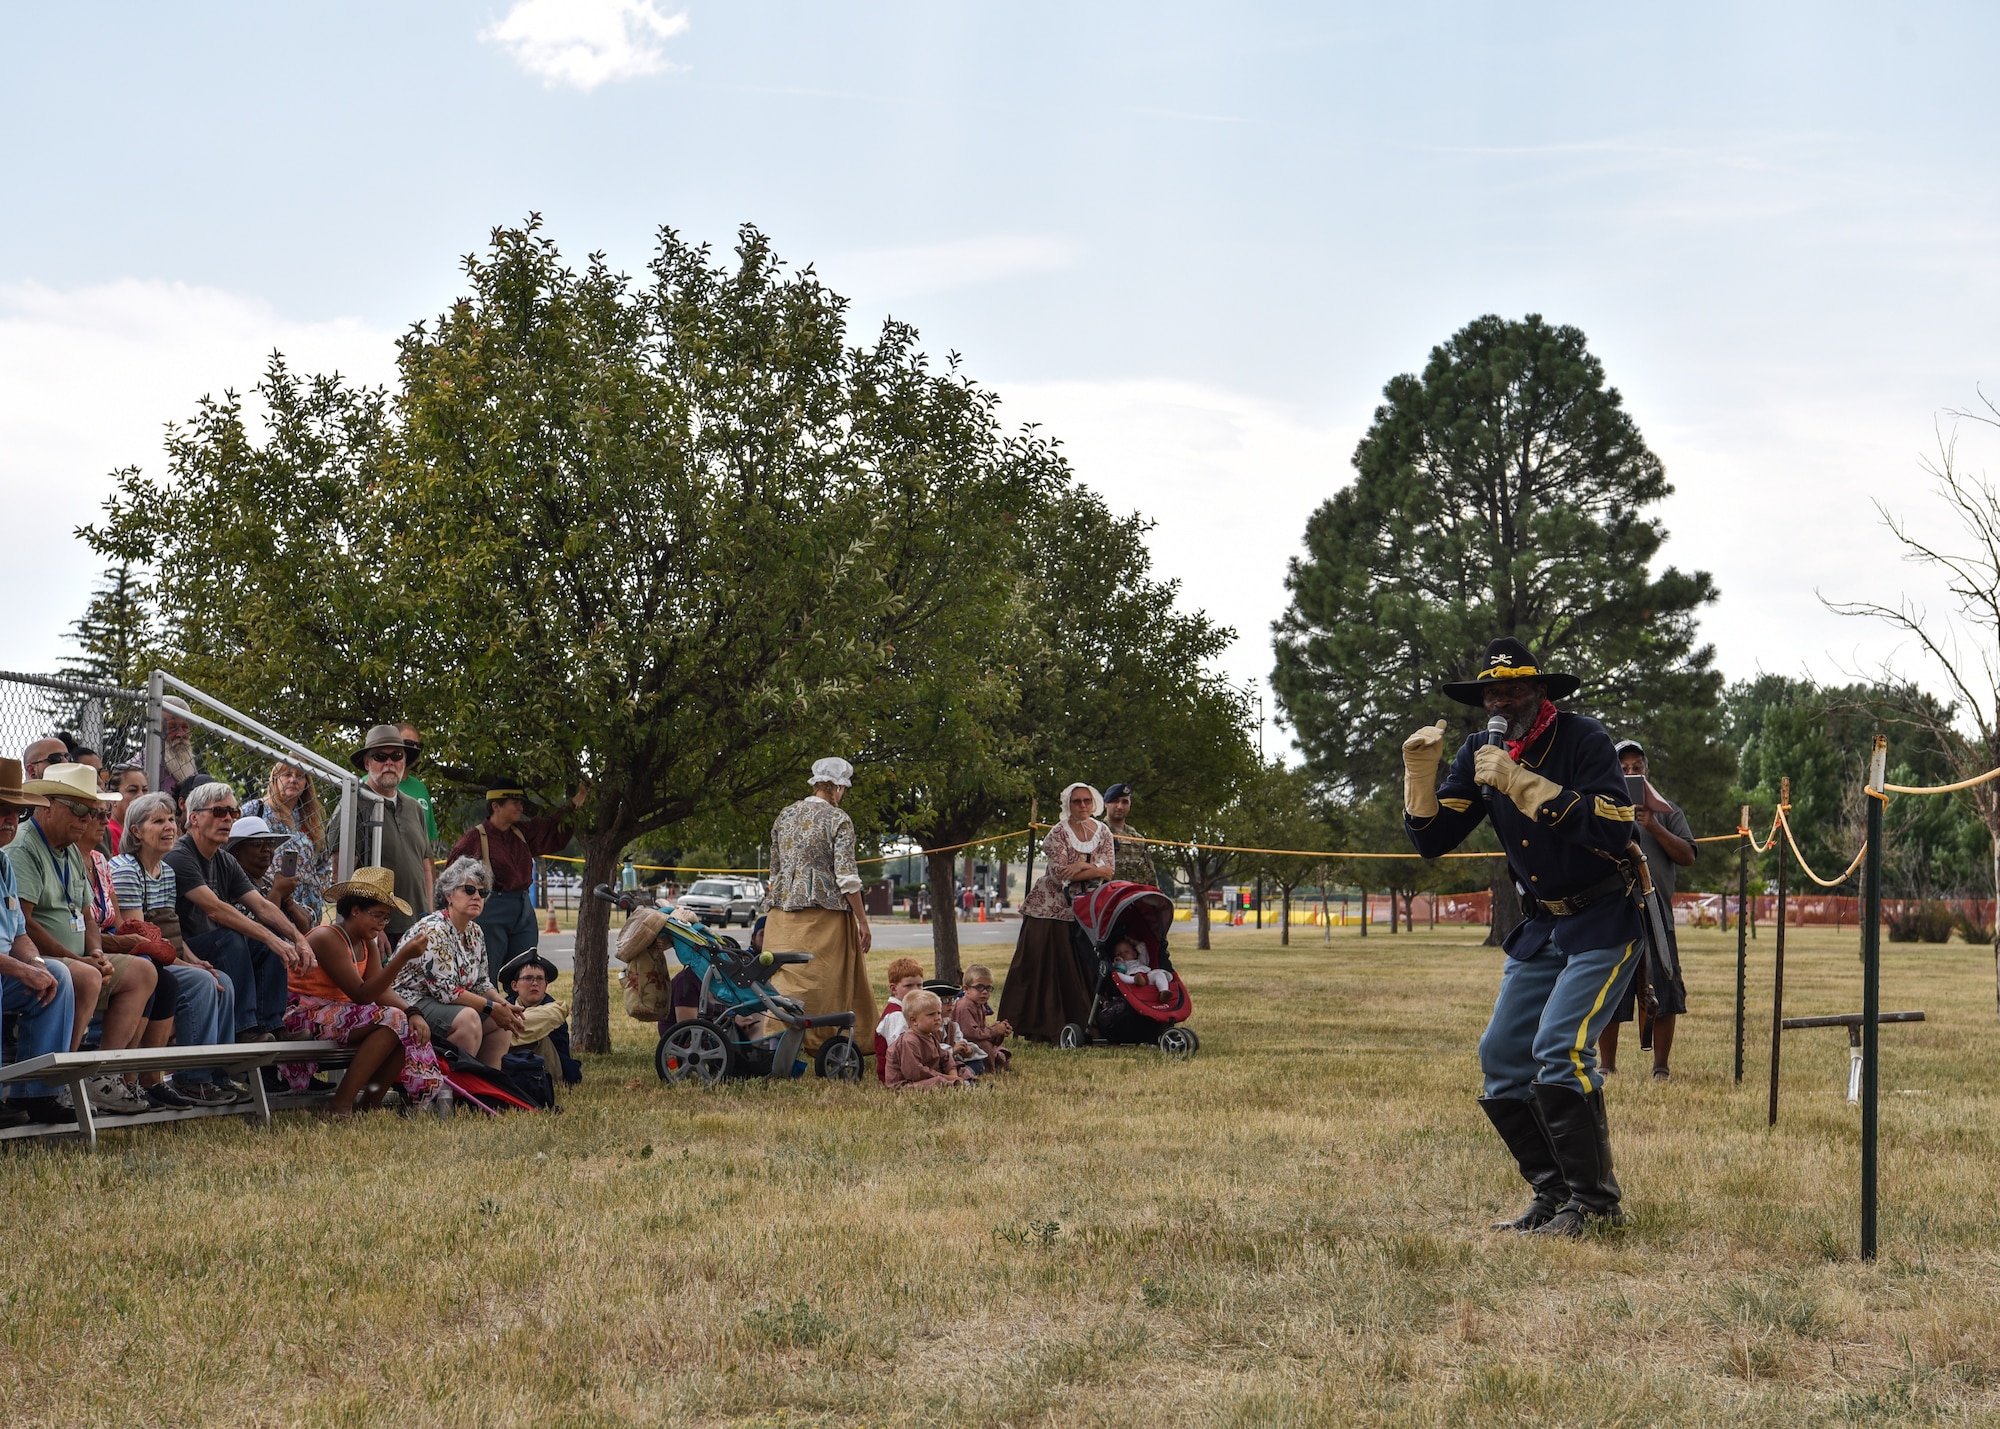 Fred Applewhite a Buffalo Soldier re-enactor talks to the audience about the history of the Buffalo Soldier’s during Fort D.A. Russell Days on F.E. Warren Air Force Base, Wyo., July 21, 2018. The performance is a demonstration of historical cavalry precision riding drills. The annual open house brings military and civilian communities together to learn more about the base's rich history. (U.S. Air Force photo by Airman 1st Class Braydon Williams)